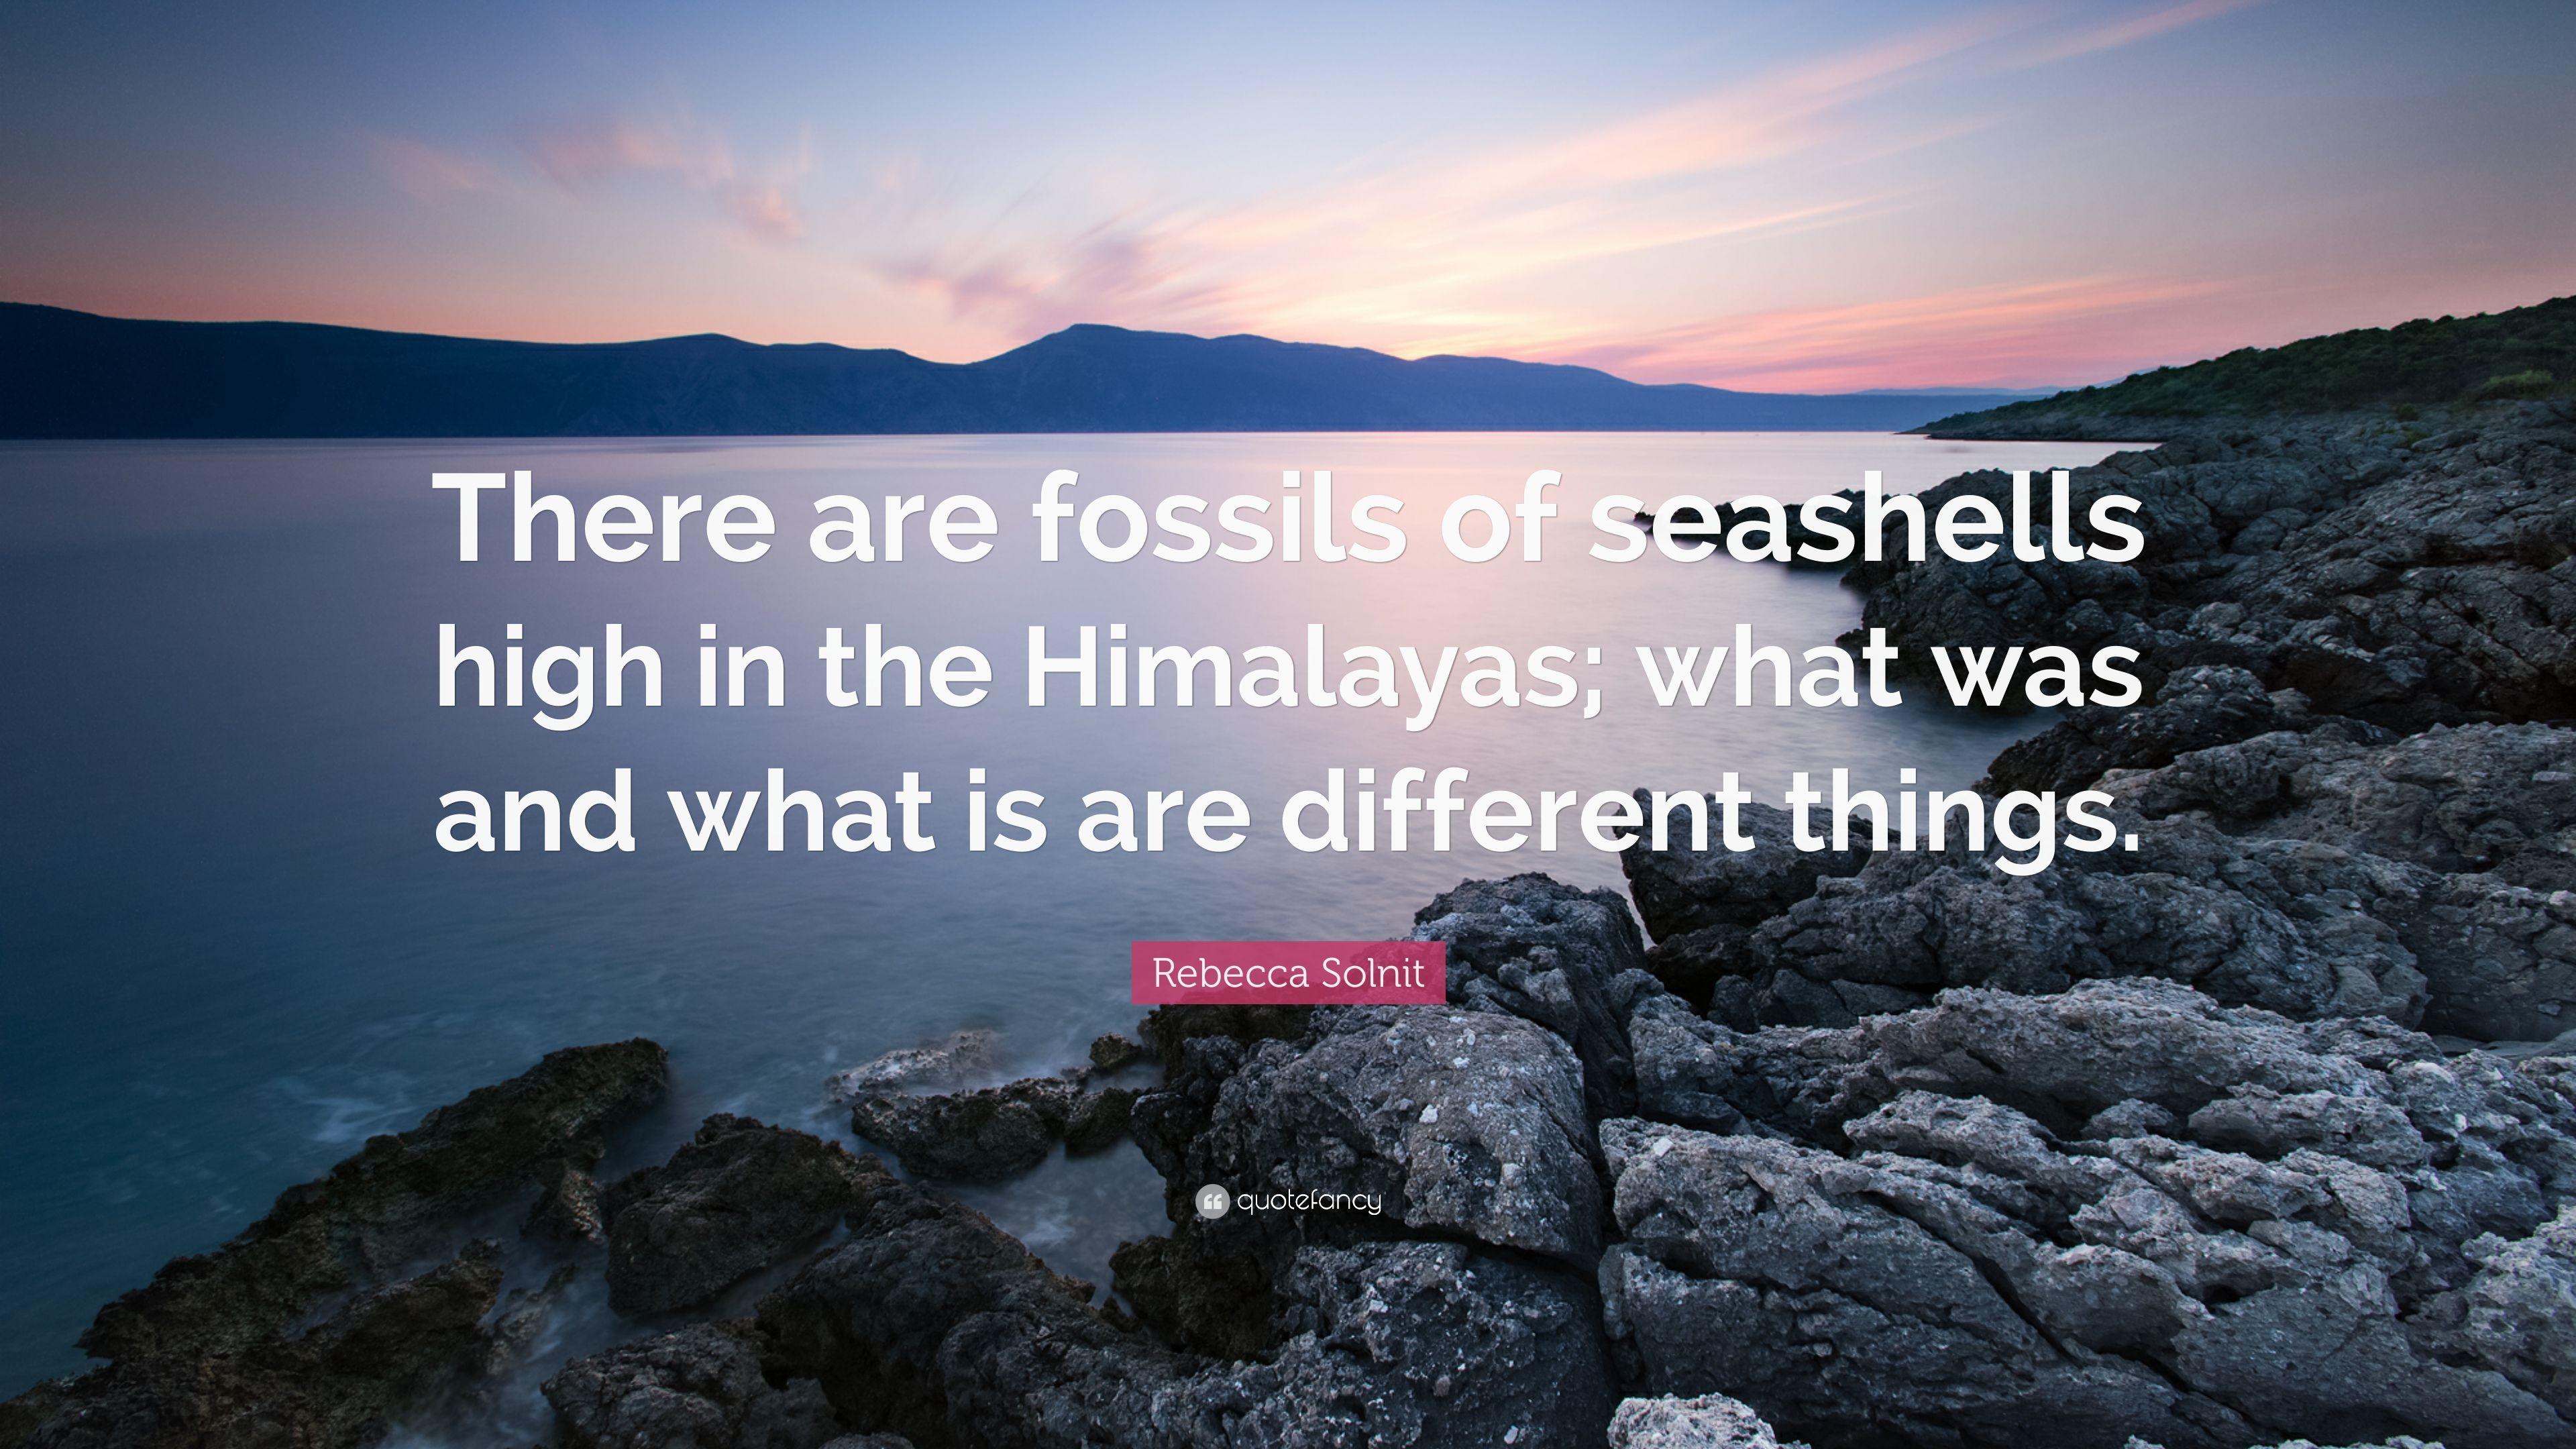 Rebecca Solnit Quote: “There are fossils of seashells high in